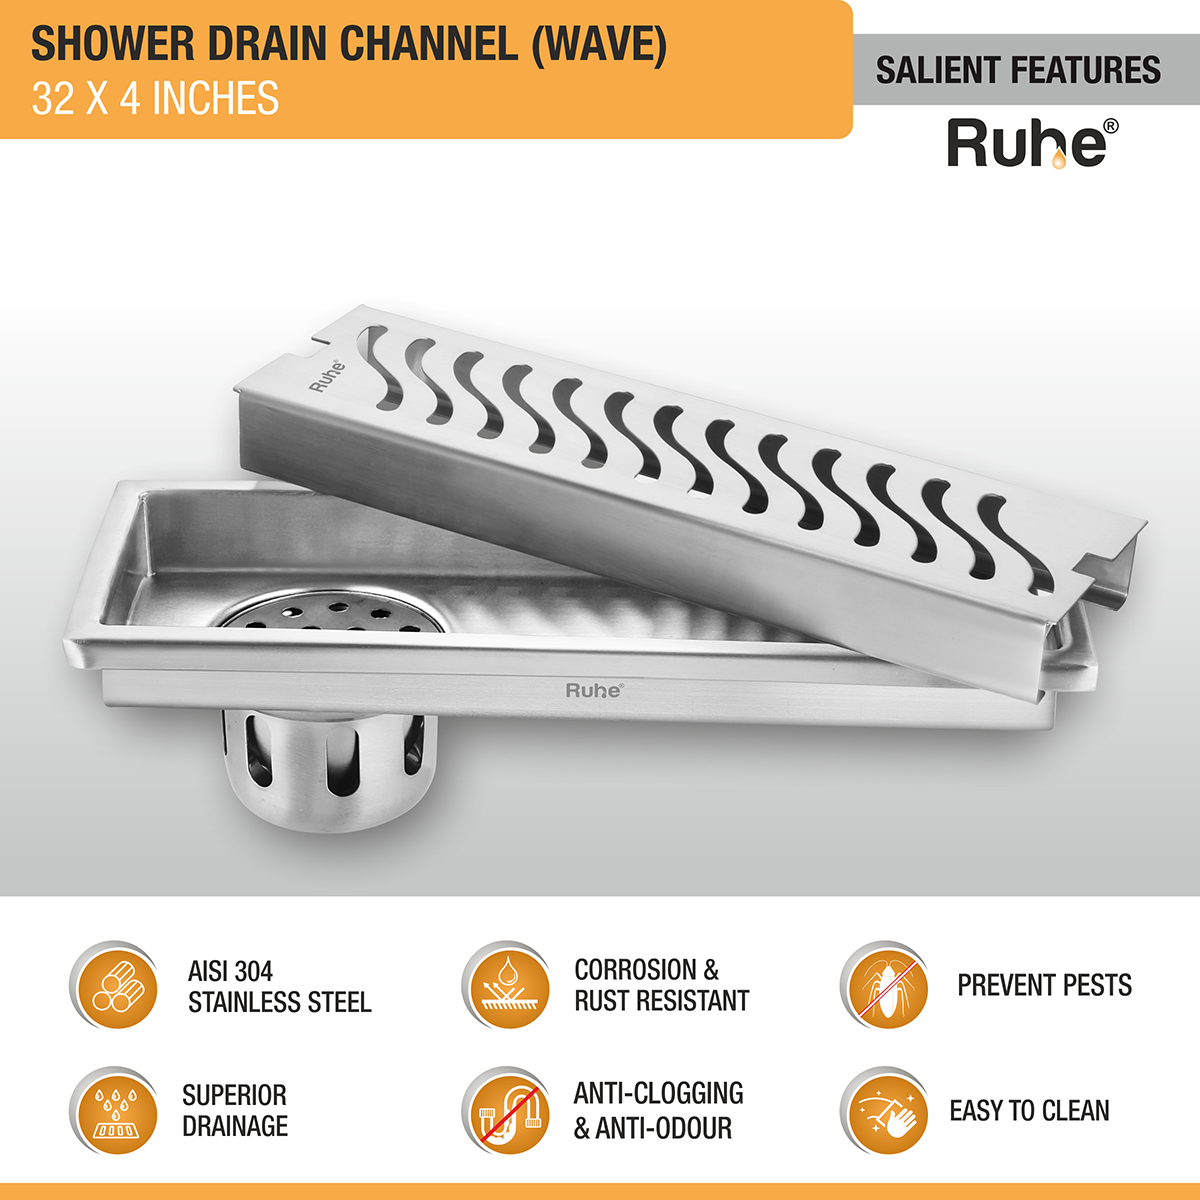 Wave Shower Drain Channel (32 X 4 Inches) with Cockroach Trap (304 Grade) features